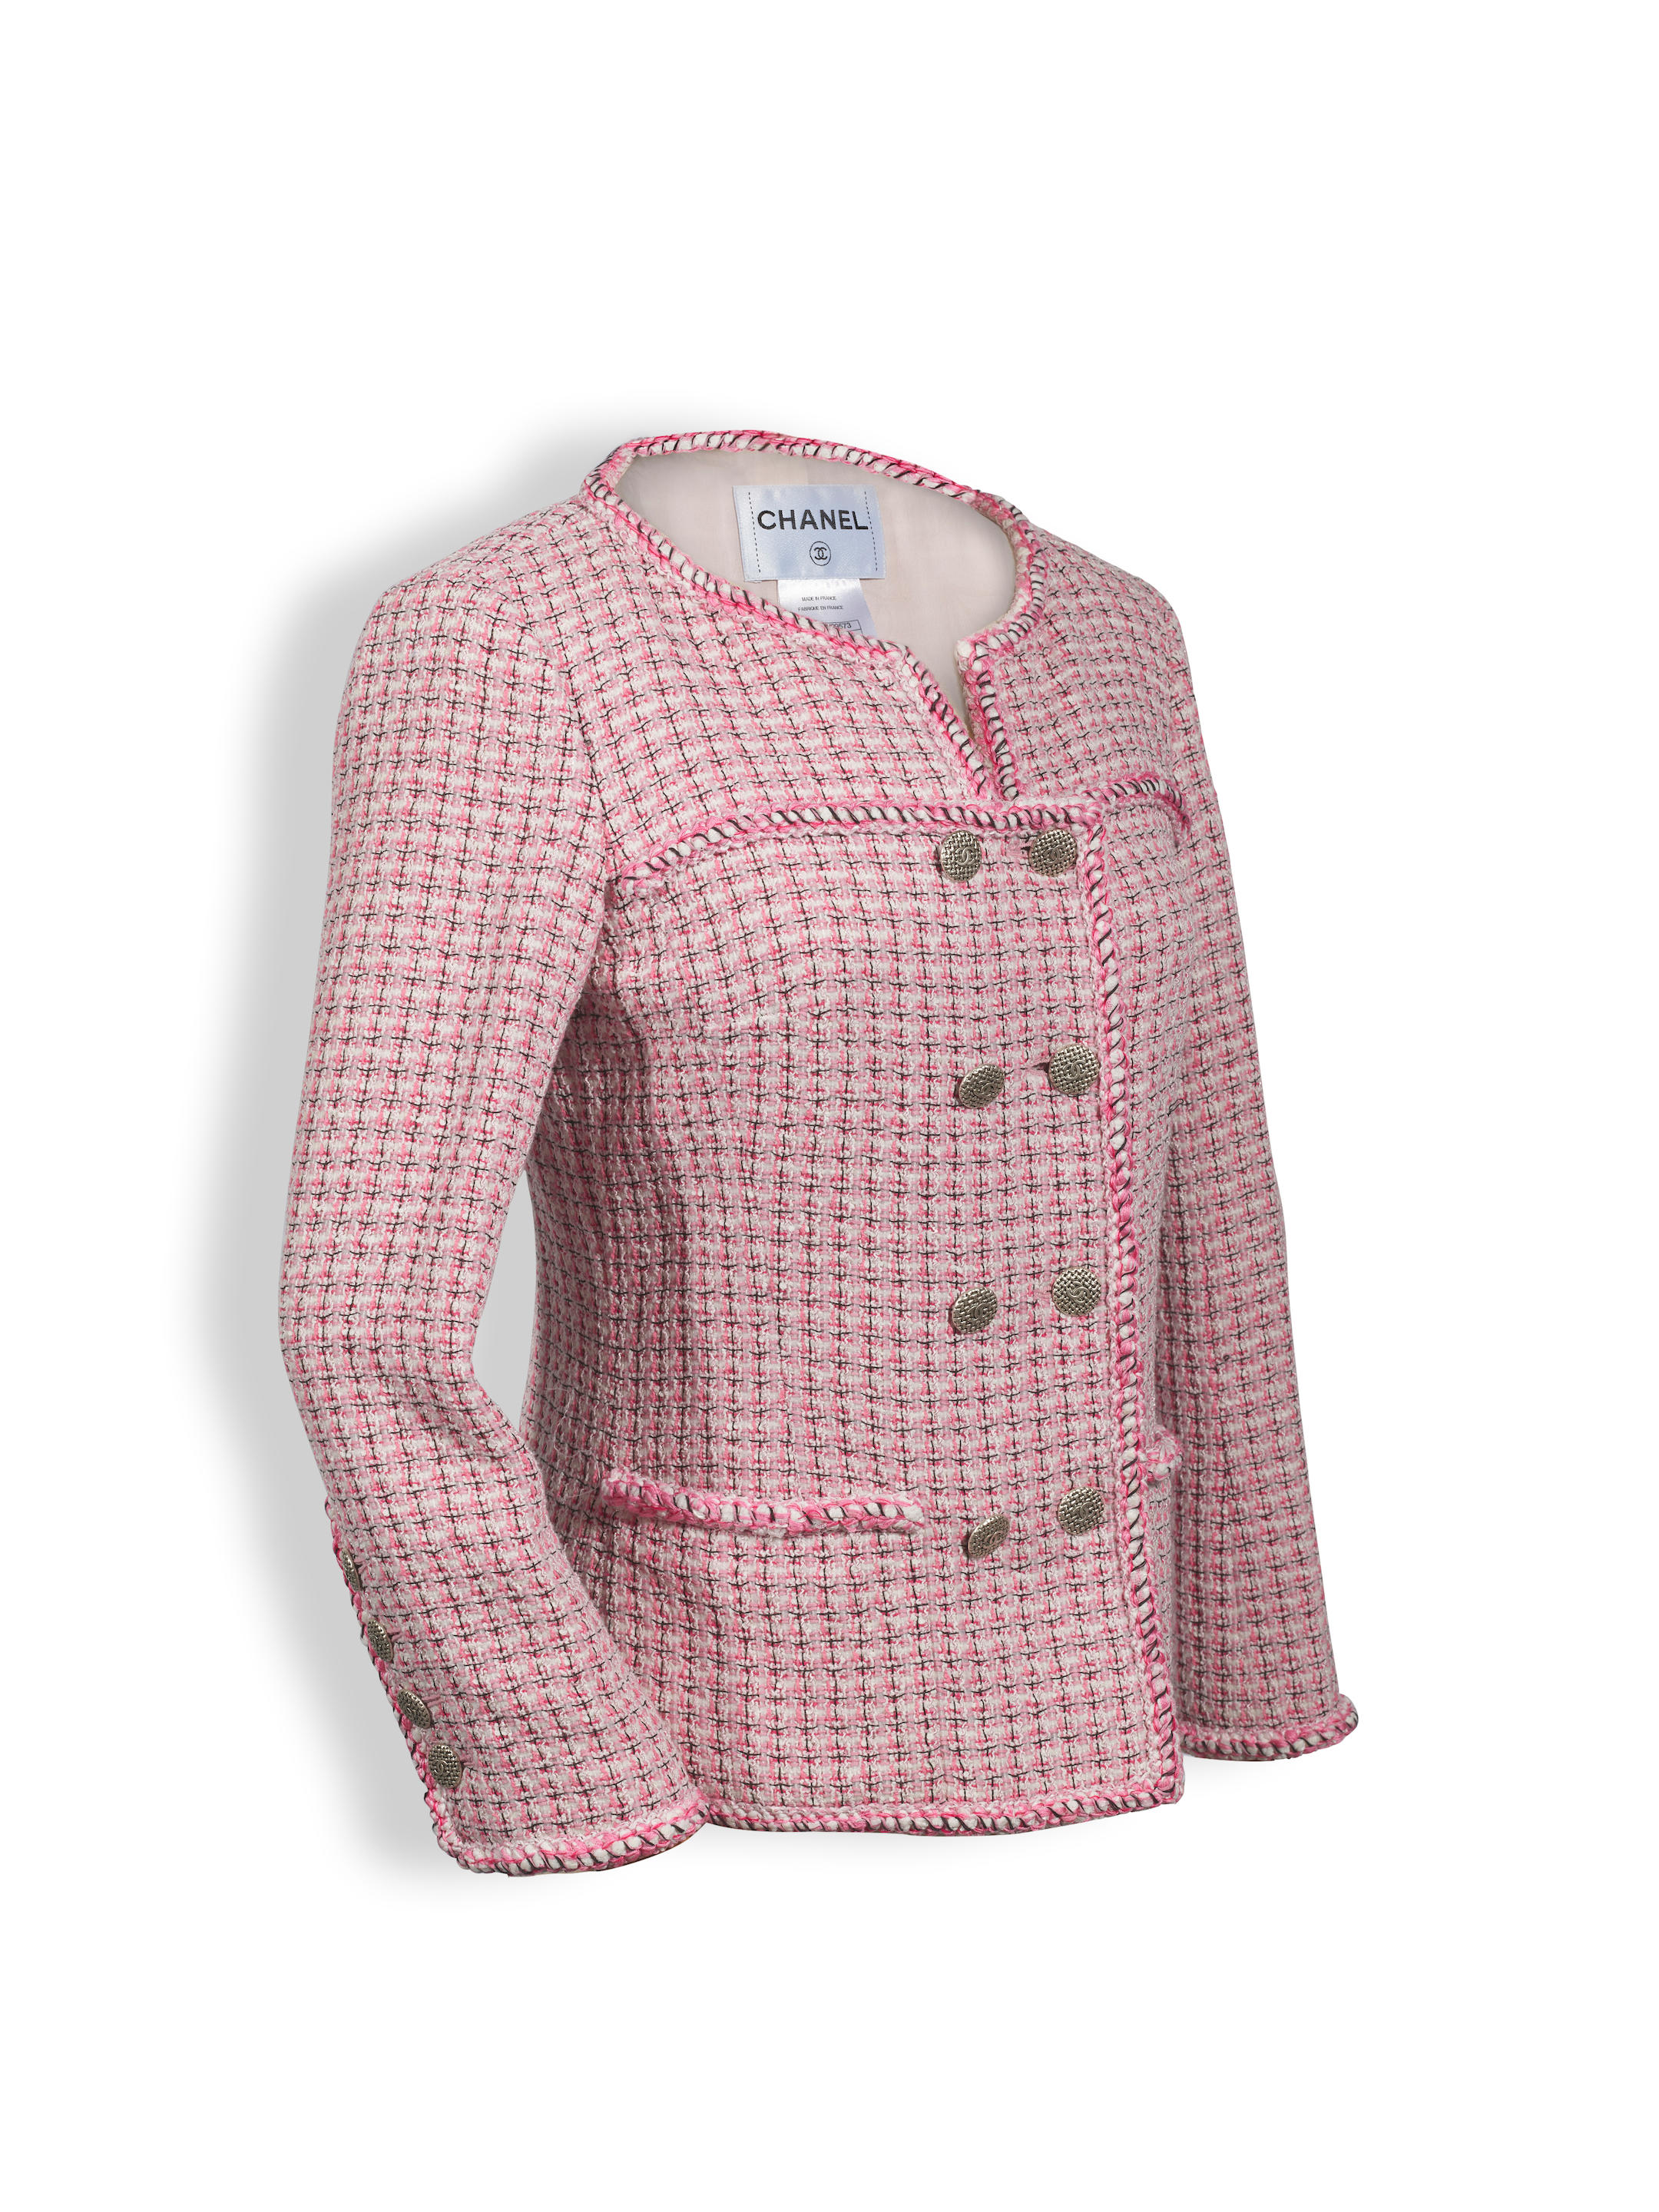 Chanel Pink Tweed Jacket, c. 2004 - auctions & price archive